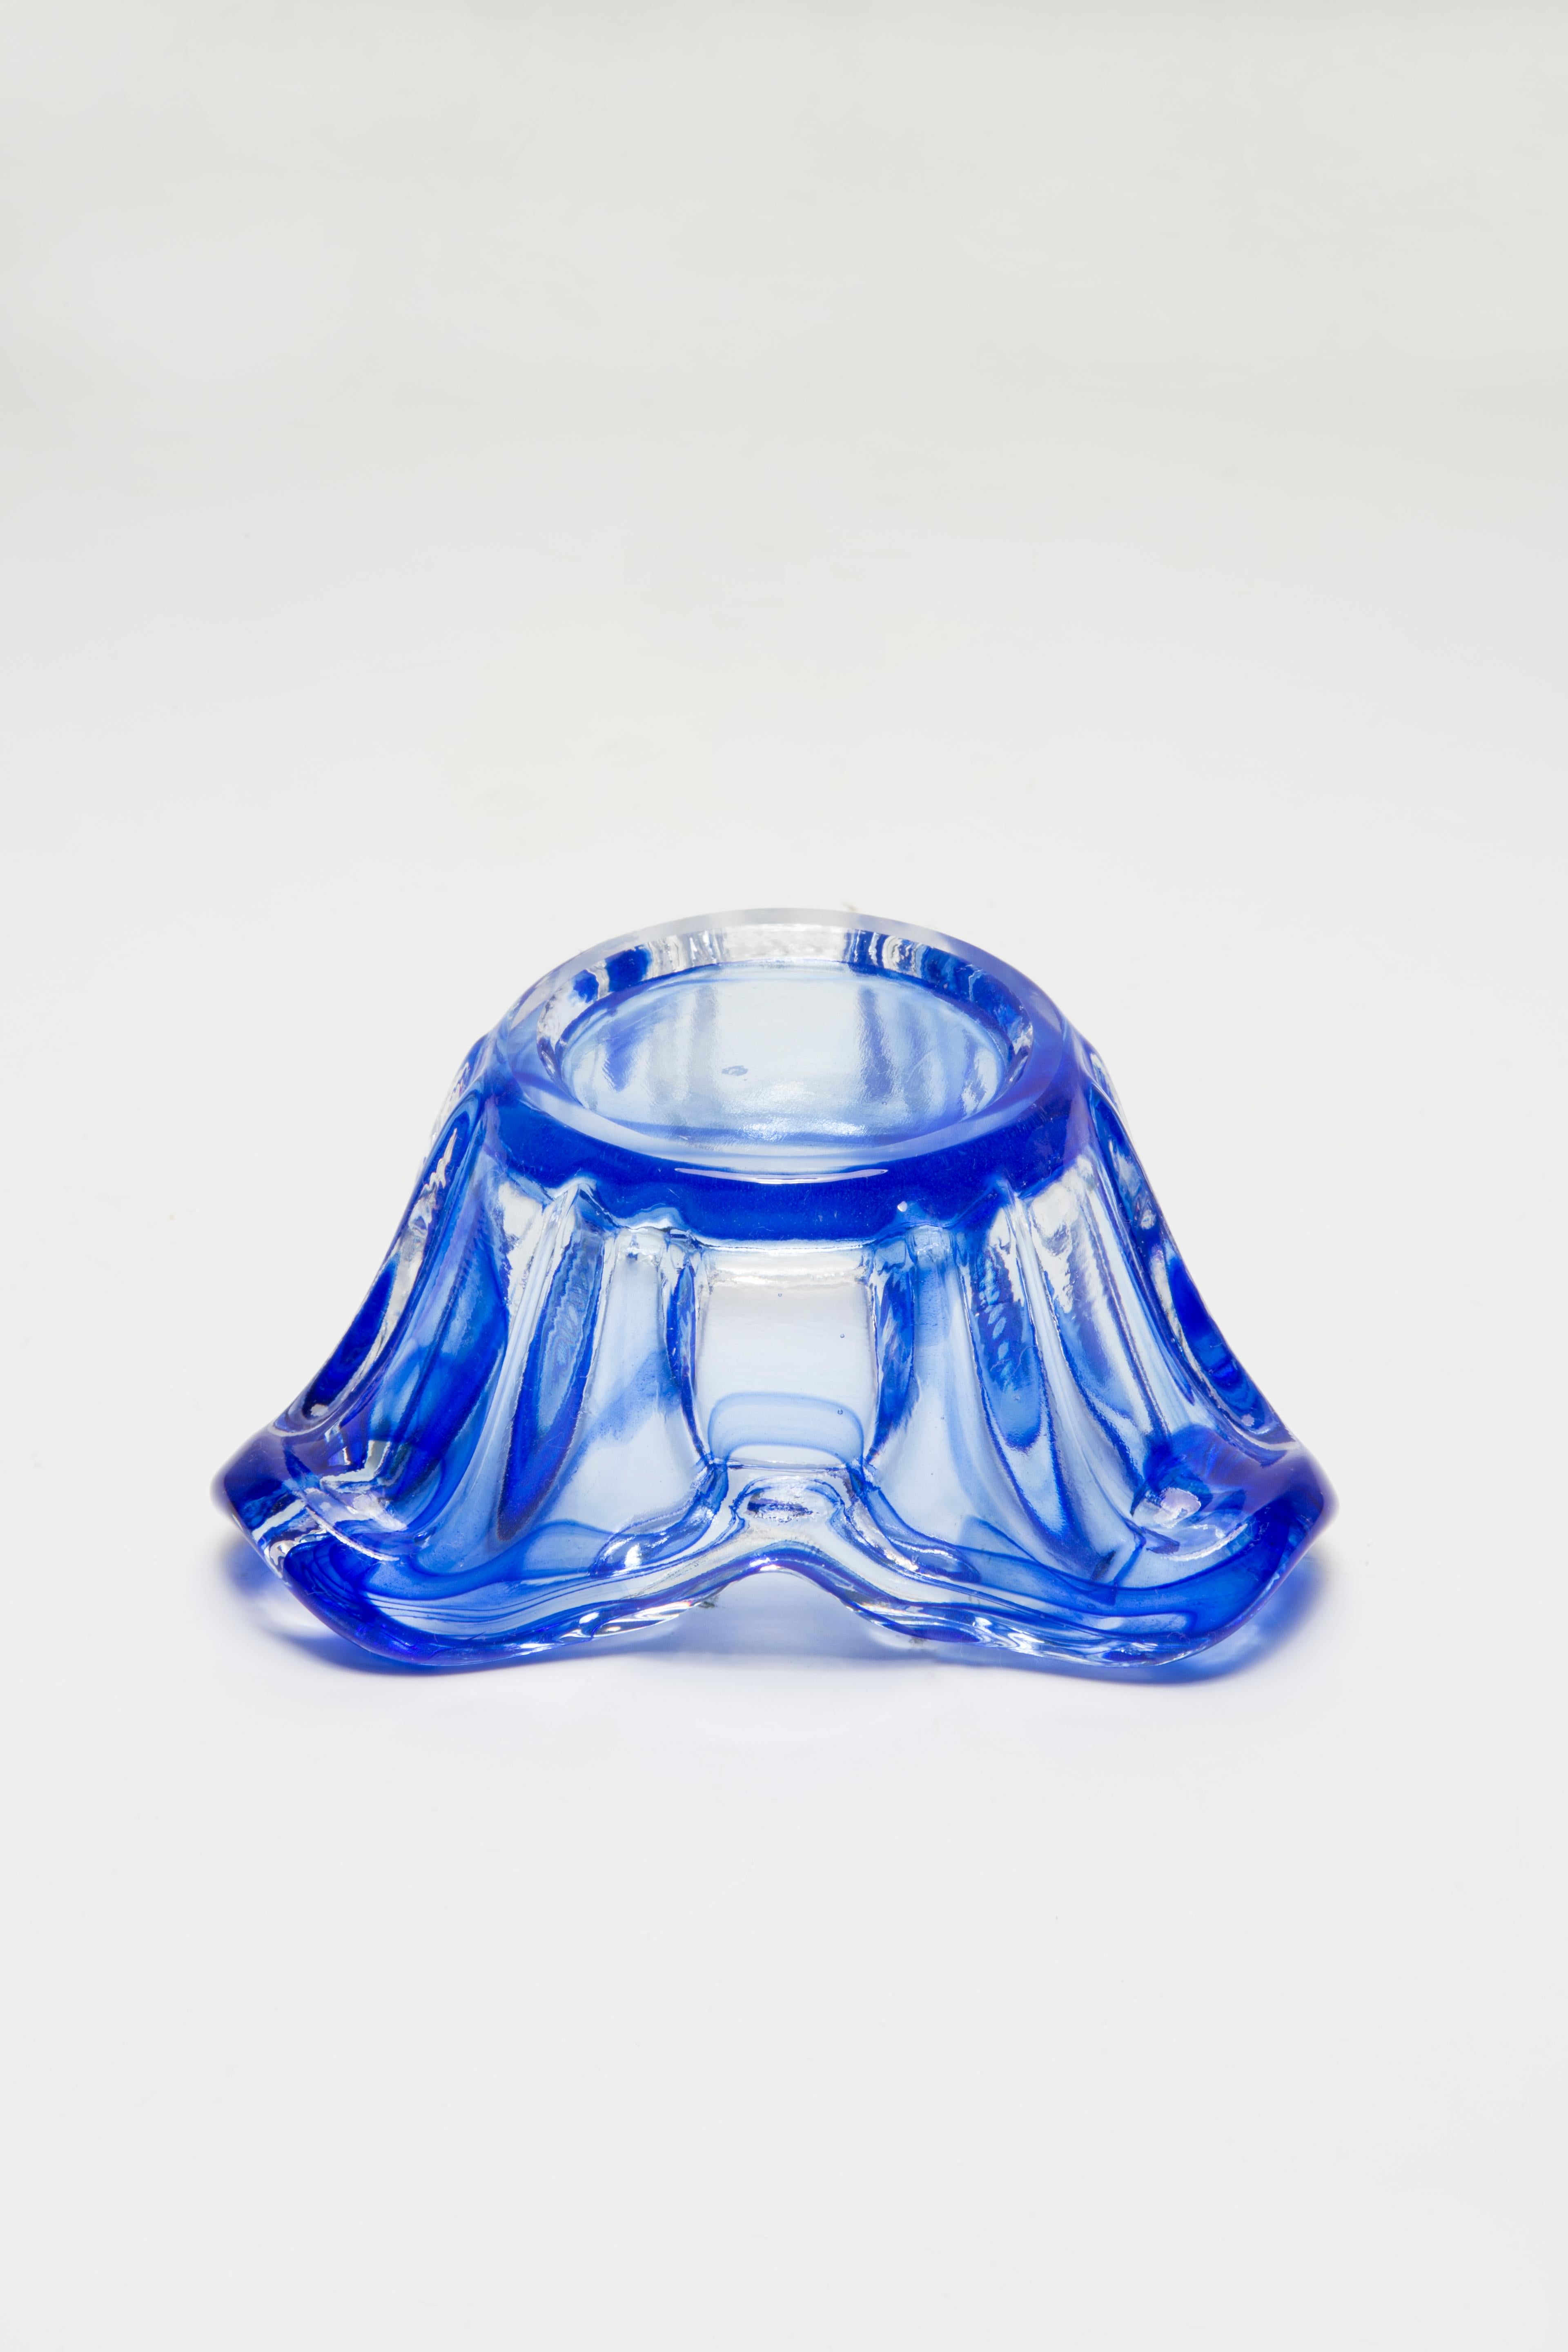 Mid Century Crystal Blue Artistic Glass Ashtray Bowl, Italy, 1970s For Sale 5